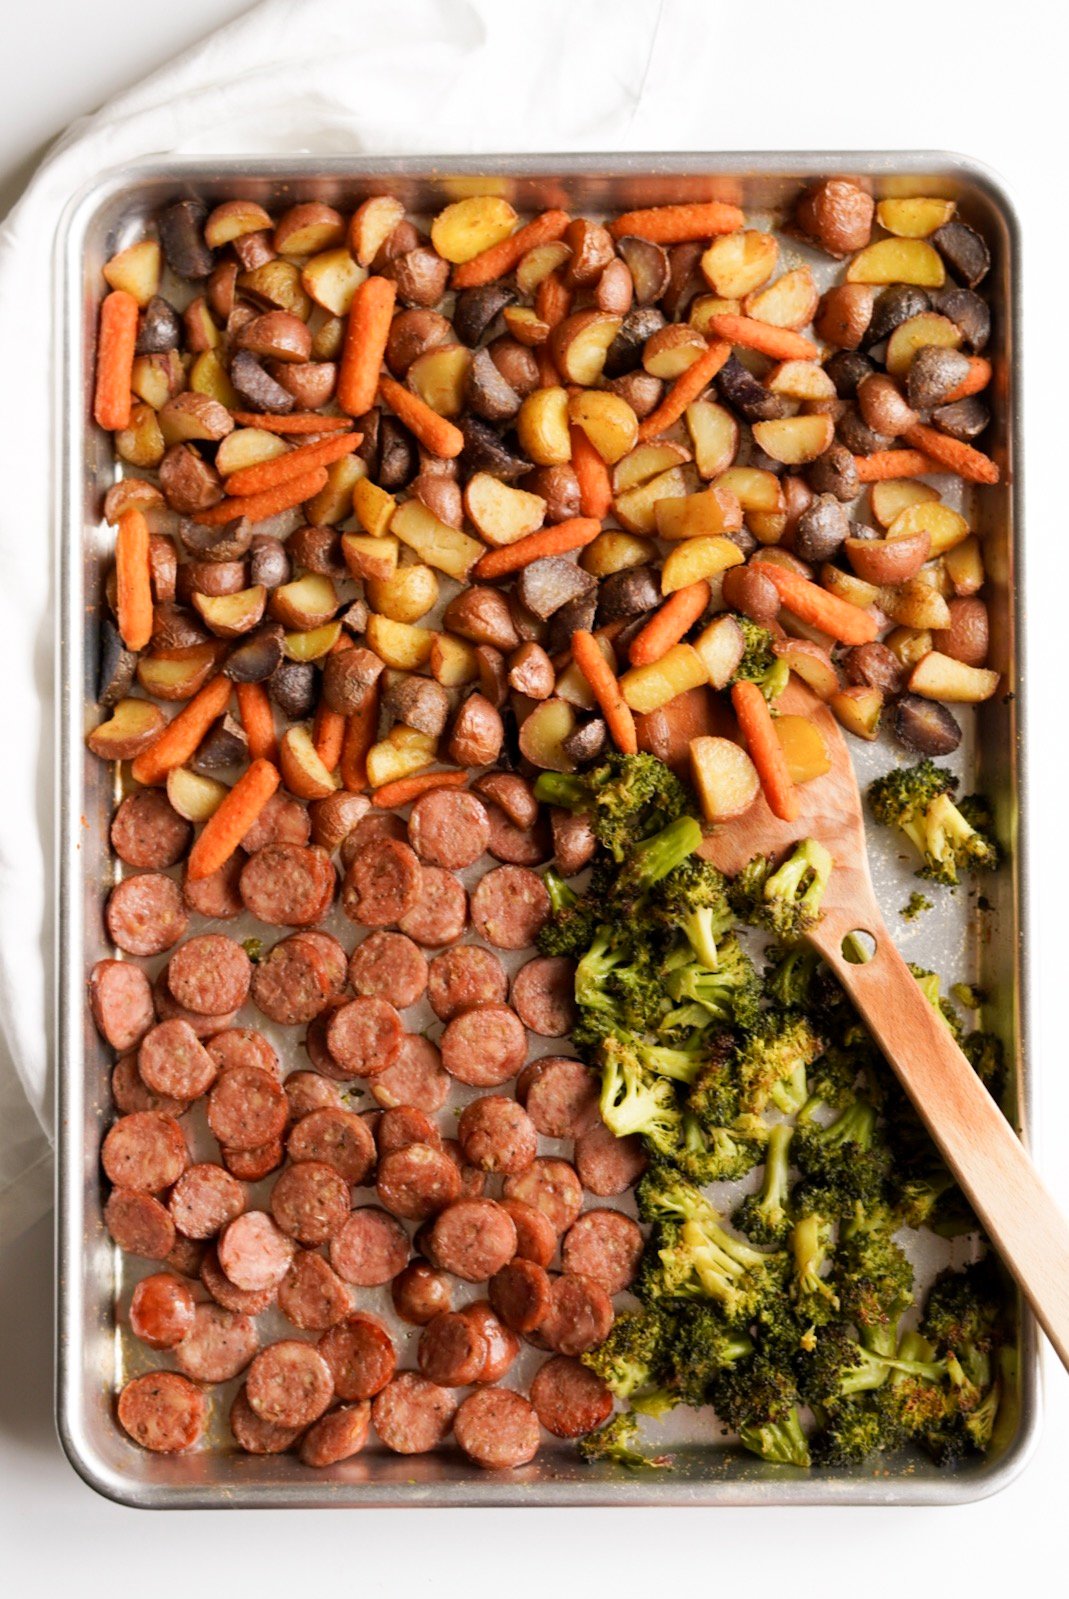 55 Sheet-Pan Dinners to Make Life Just a Little Easier